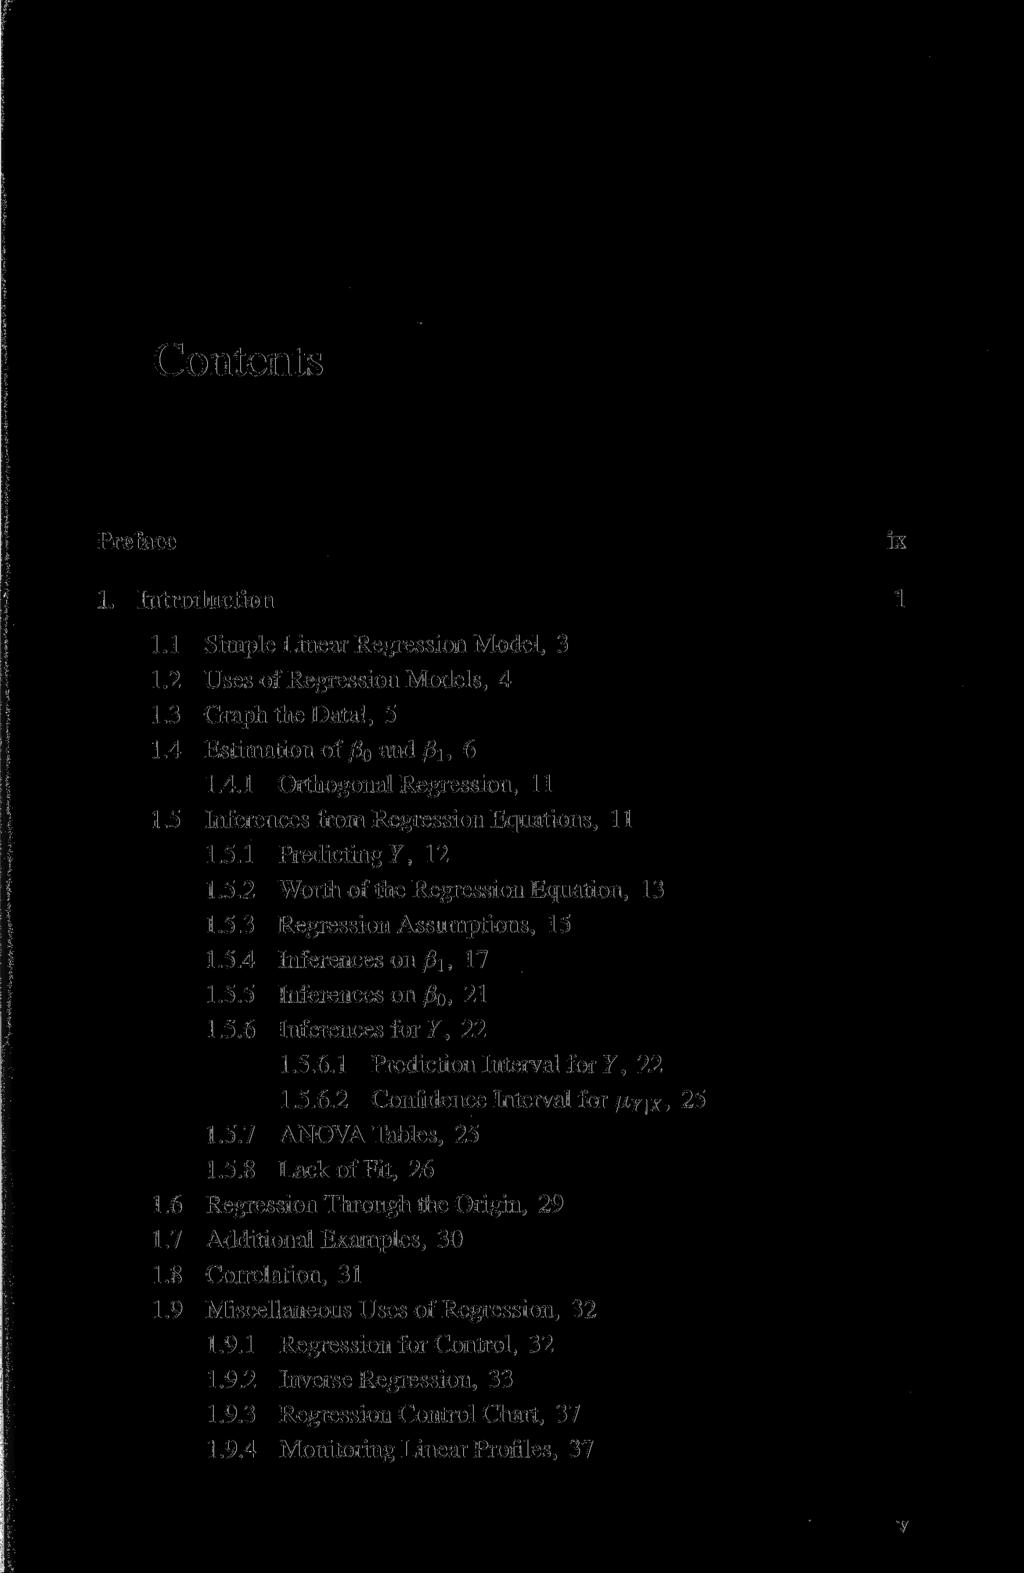 Contents Preface 1. Introduction 1.1 Simple Linear Regression Model, 3 1.2 Uses of Regression Models, 4 1.3 Graph the Data!, 5 1.4 Estimation of ßo and ß\, 6 1.4.1 Orthogonal Regression, 11 1.